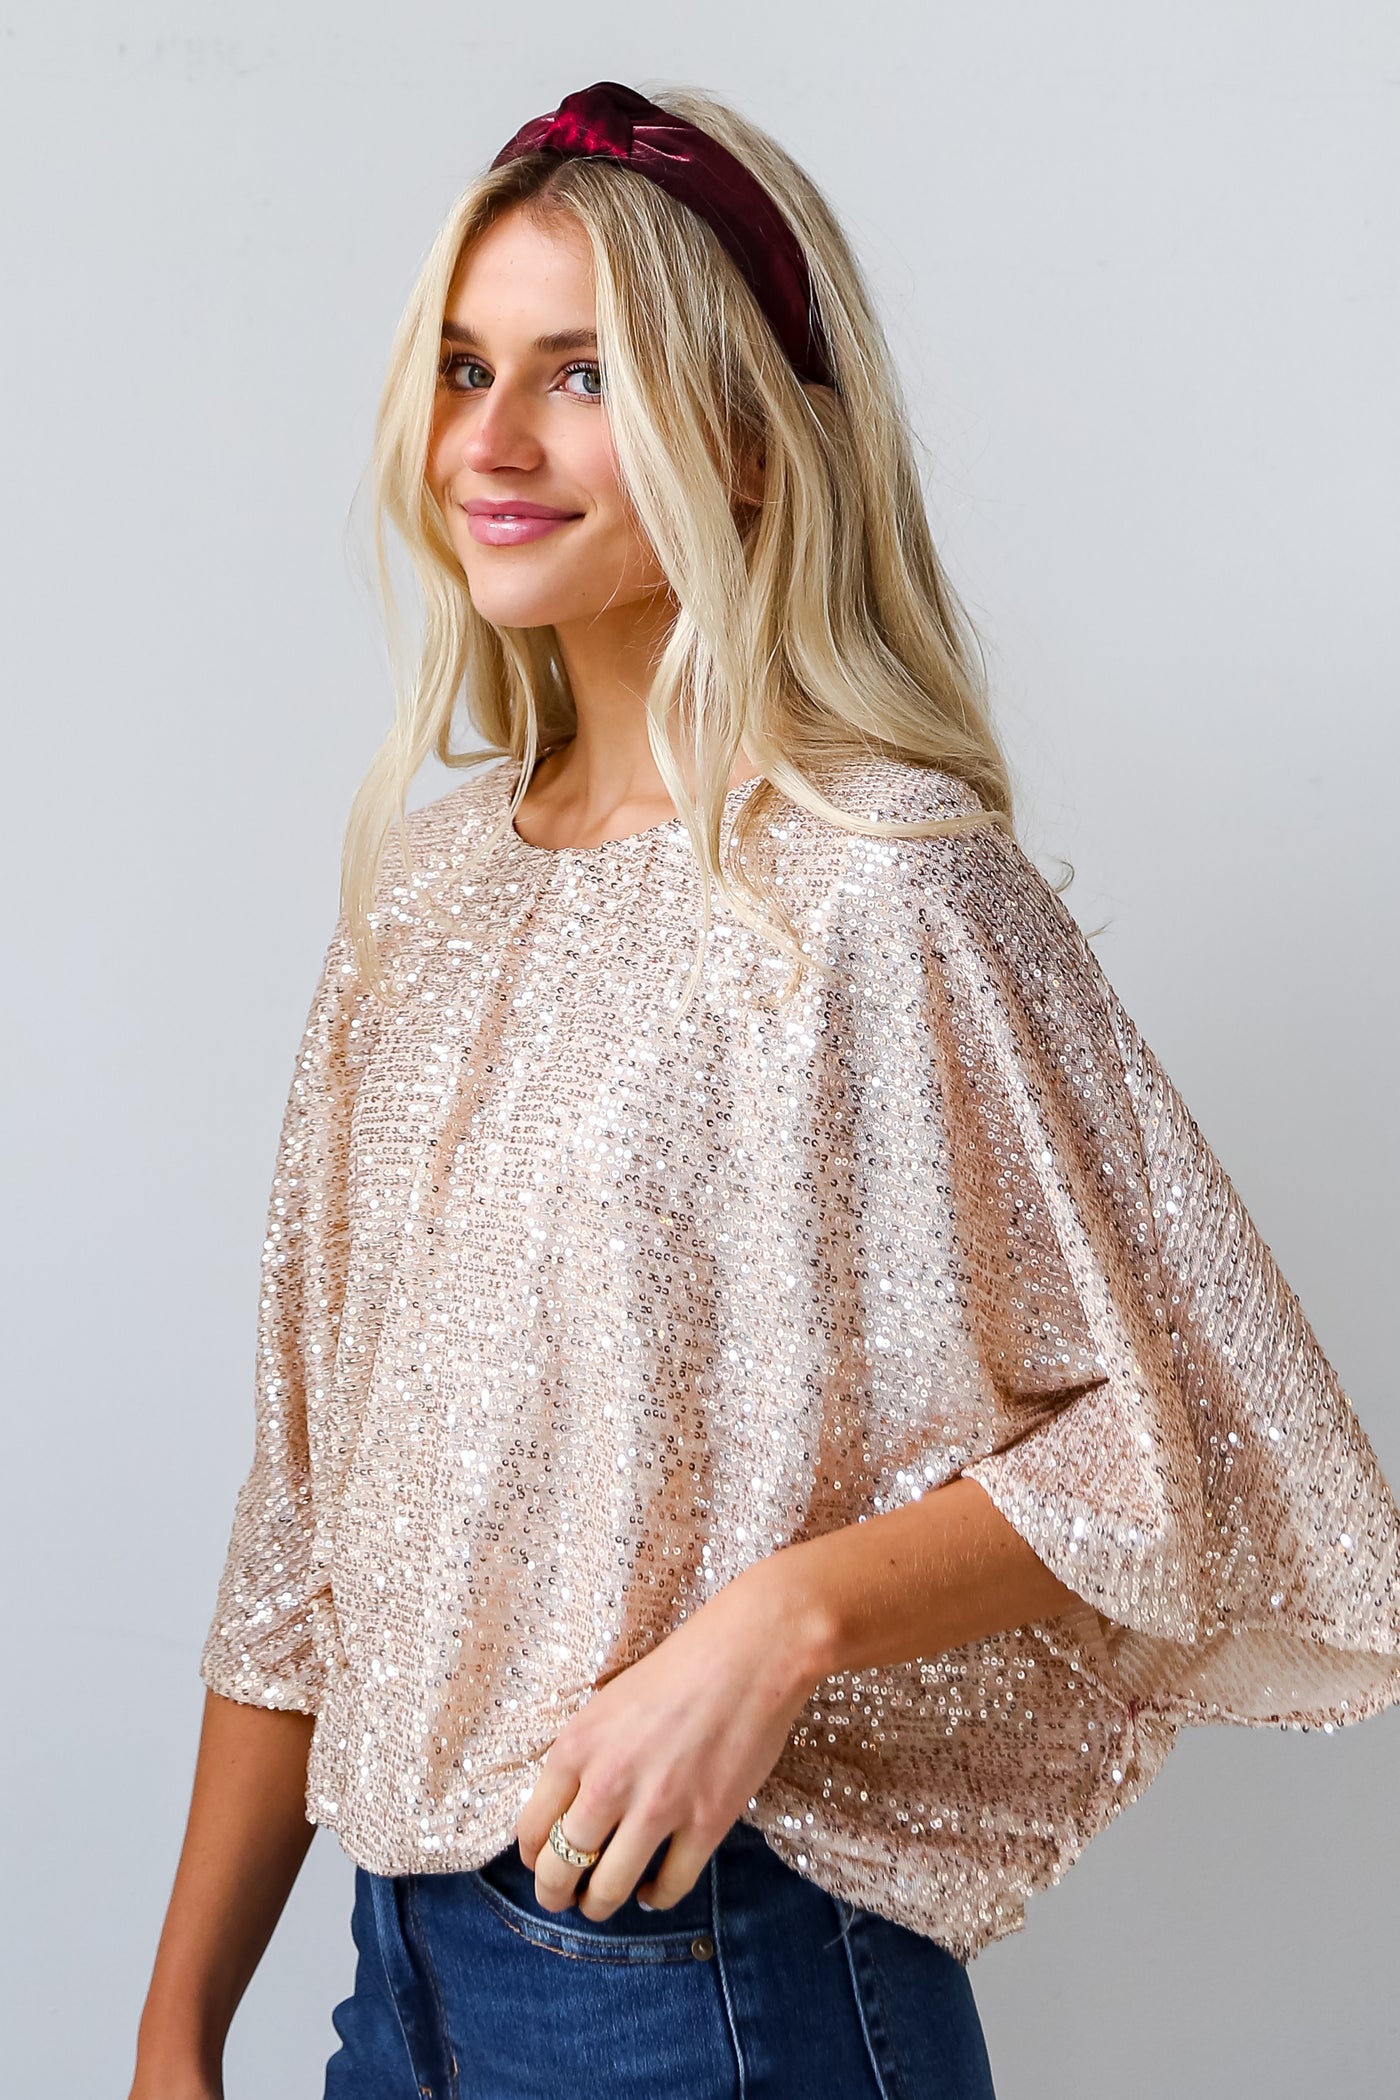 sparkly holiday tops